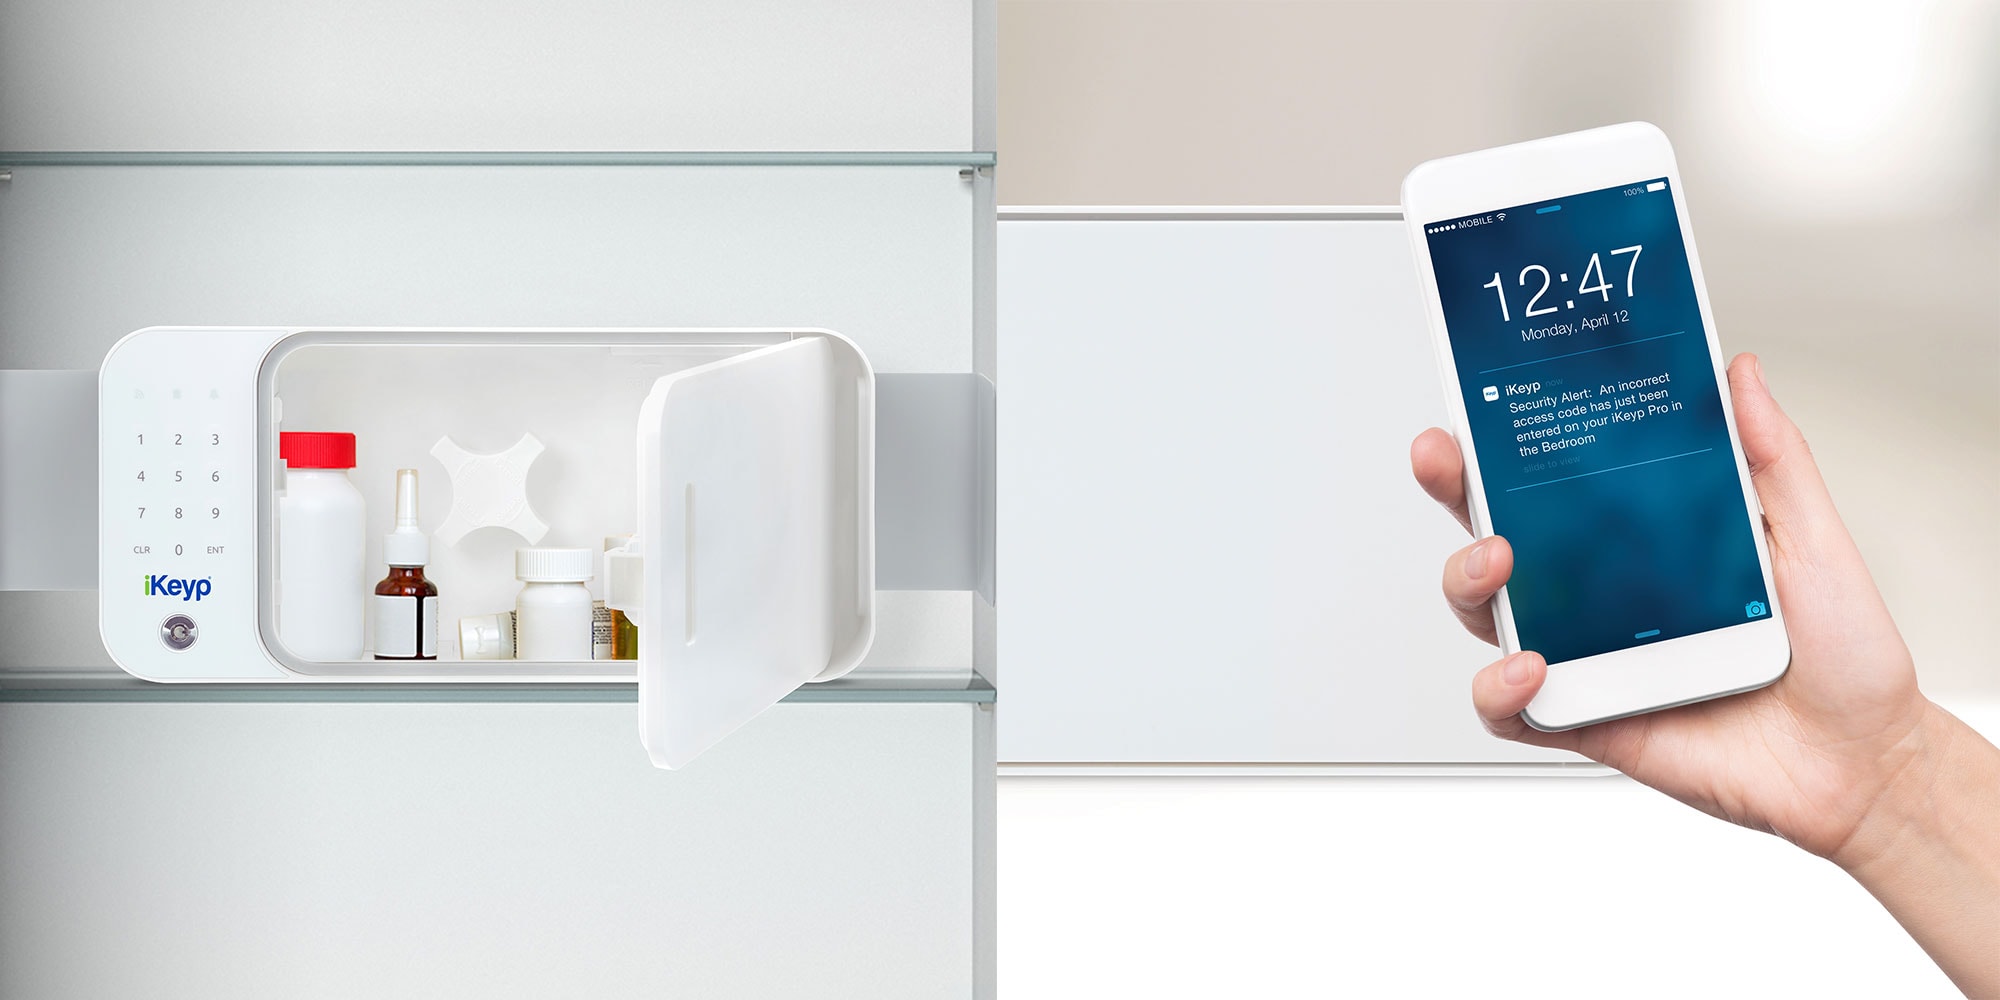 With Wi-Fi connectivity, smartphone access and other cool features, the iKeyp smart safe is ideal for storing often-used valuables like meds, passports, and more.